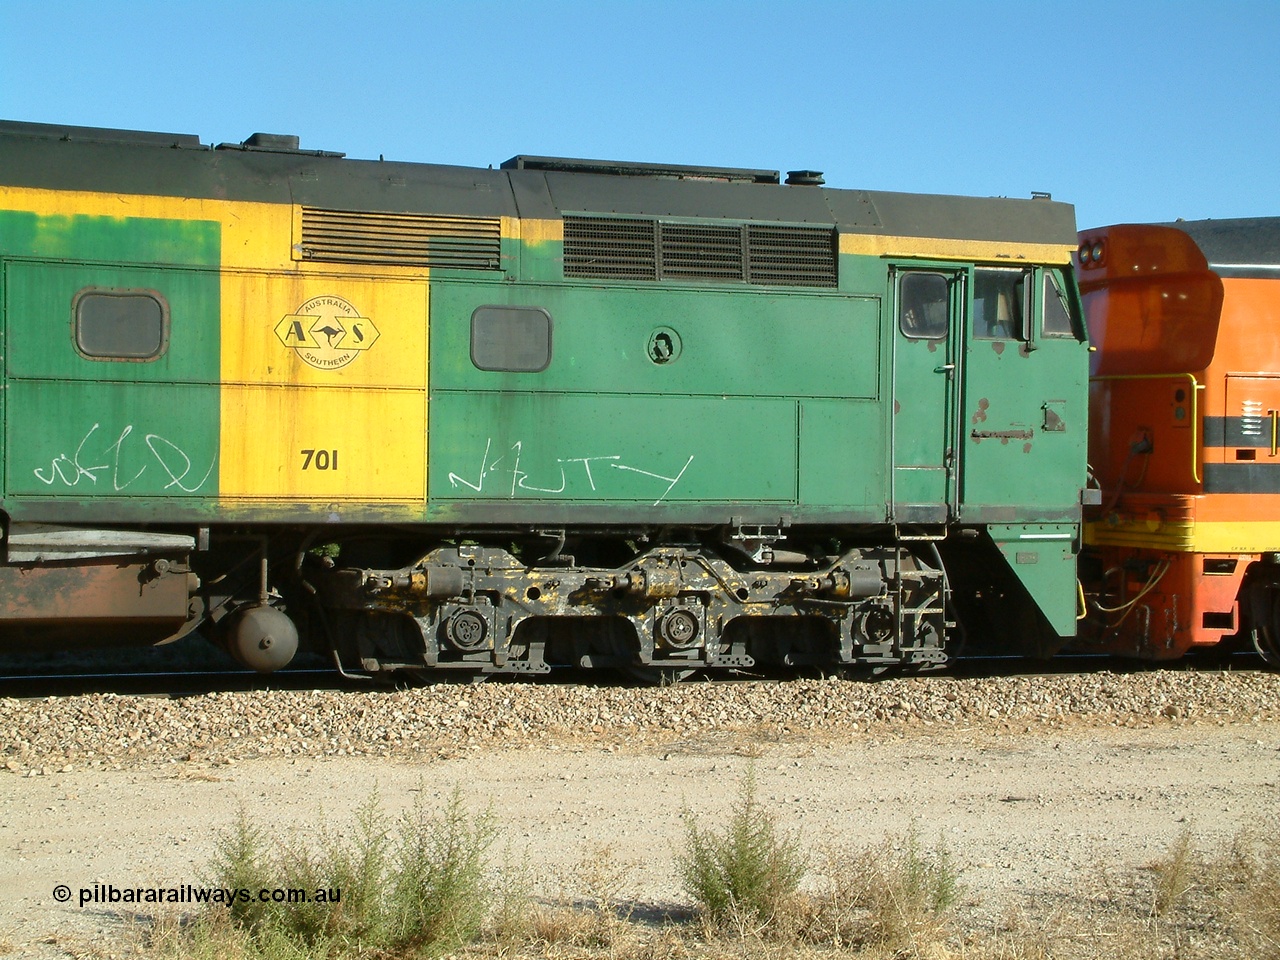 030403 154946
Gladstone, former South Australian Railways AE Goodwin built DL500G ALCo designated the 700 class, class leader 701 serial G6042-2, B end cab side shot, leads a grain train being loaded on the 3rd April 2003.
Keywords: 700-class;701;G6042-2;AE-Goodwin;ALCo;DL500G;